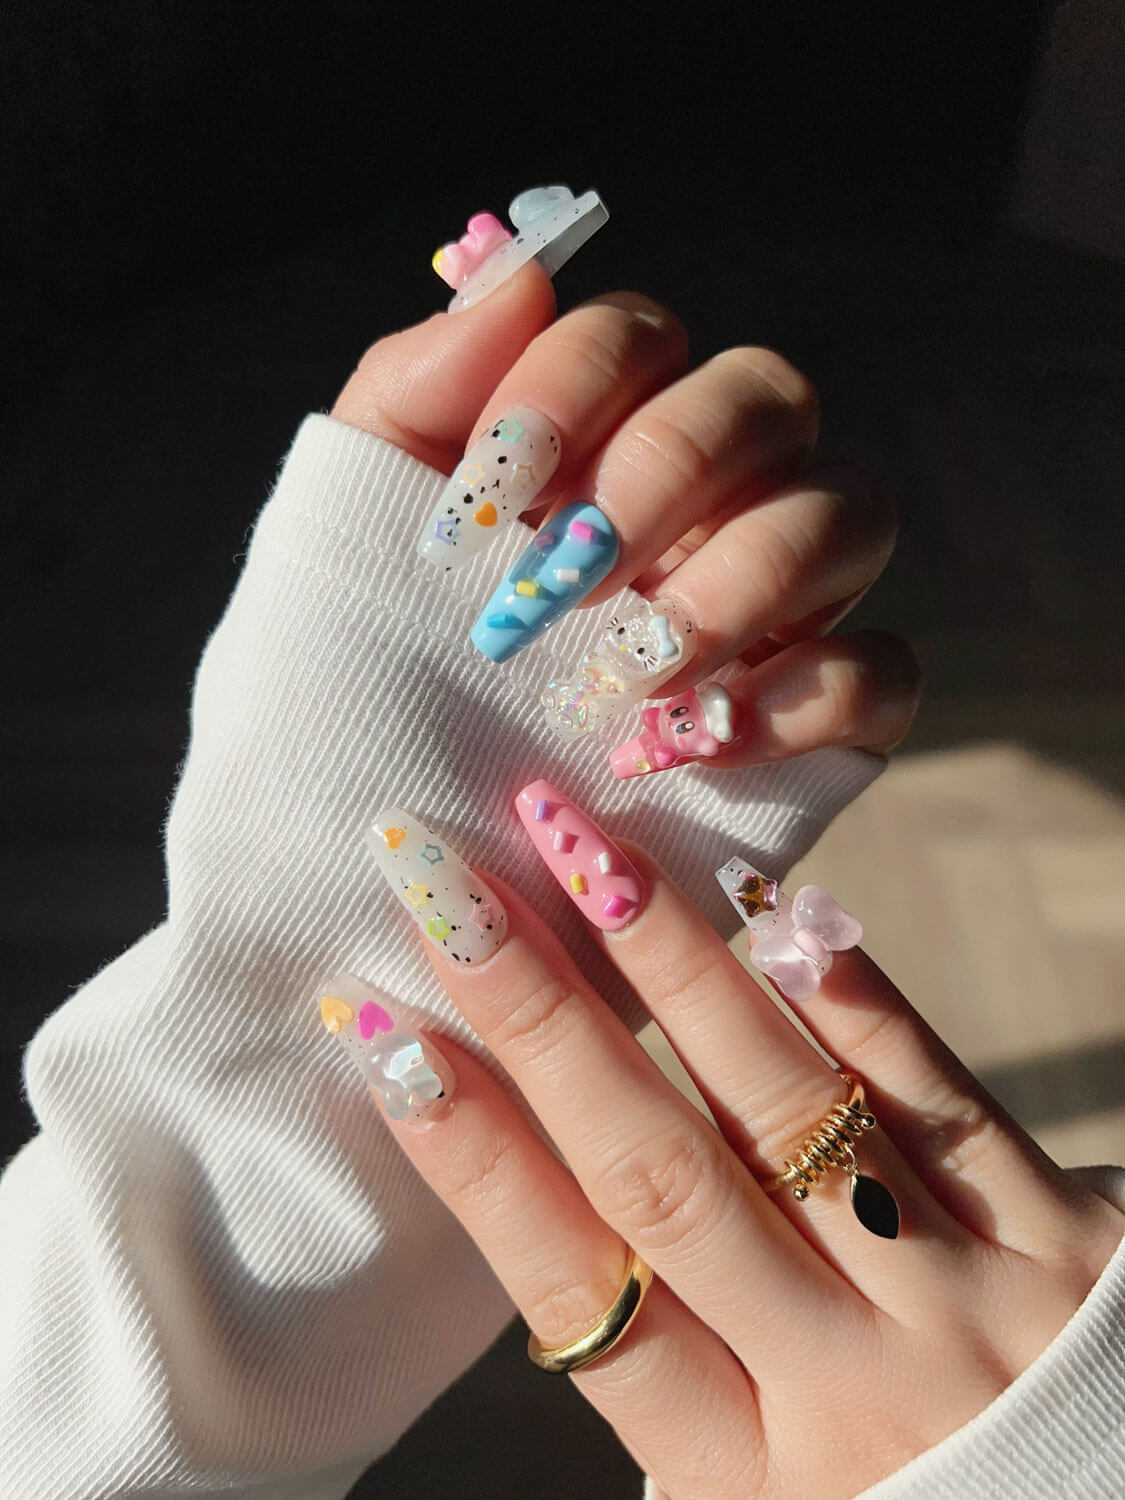 Joyee Star Kirby Med Coffin Press-on nails | Ready to ship